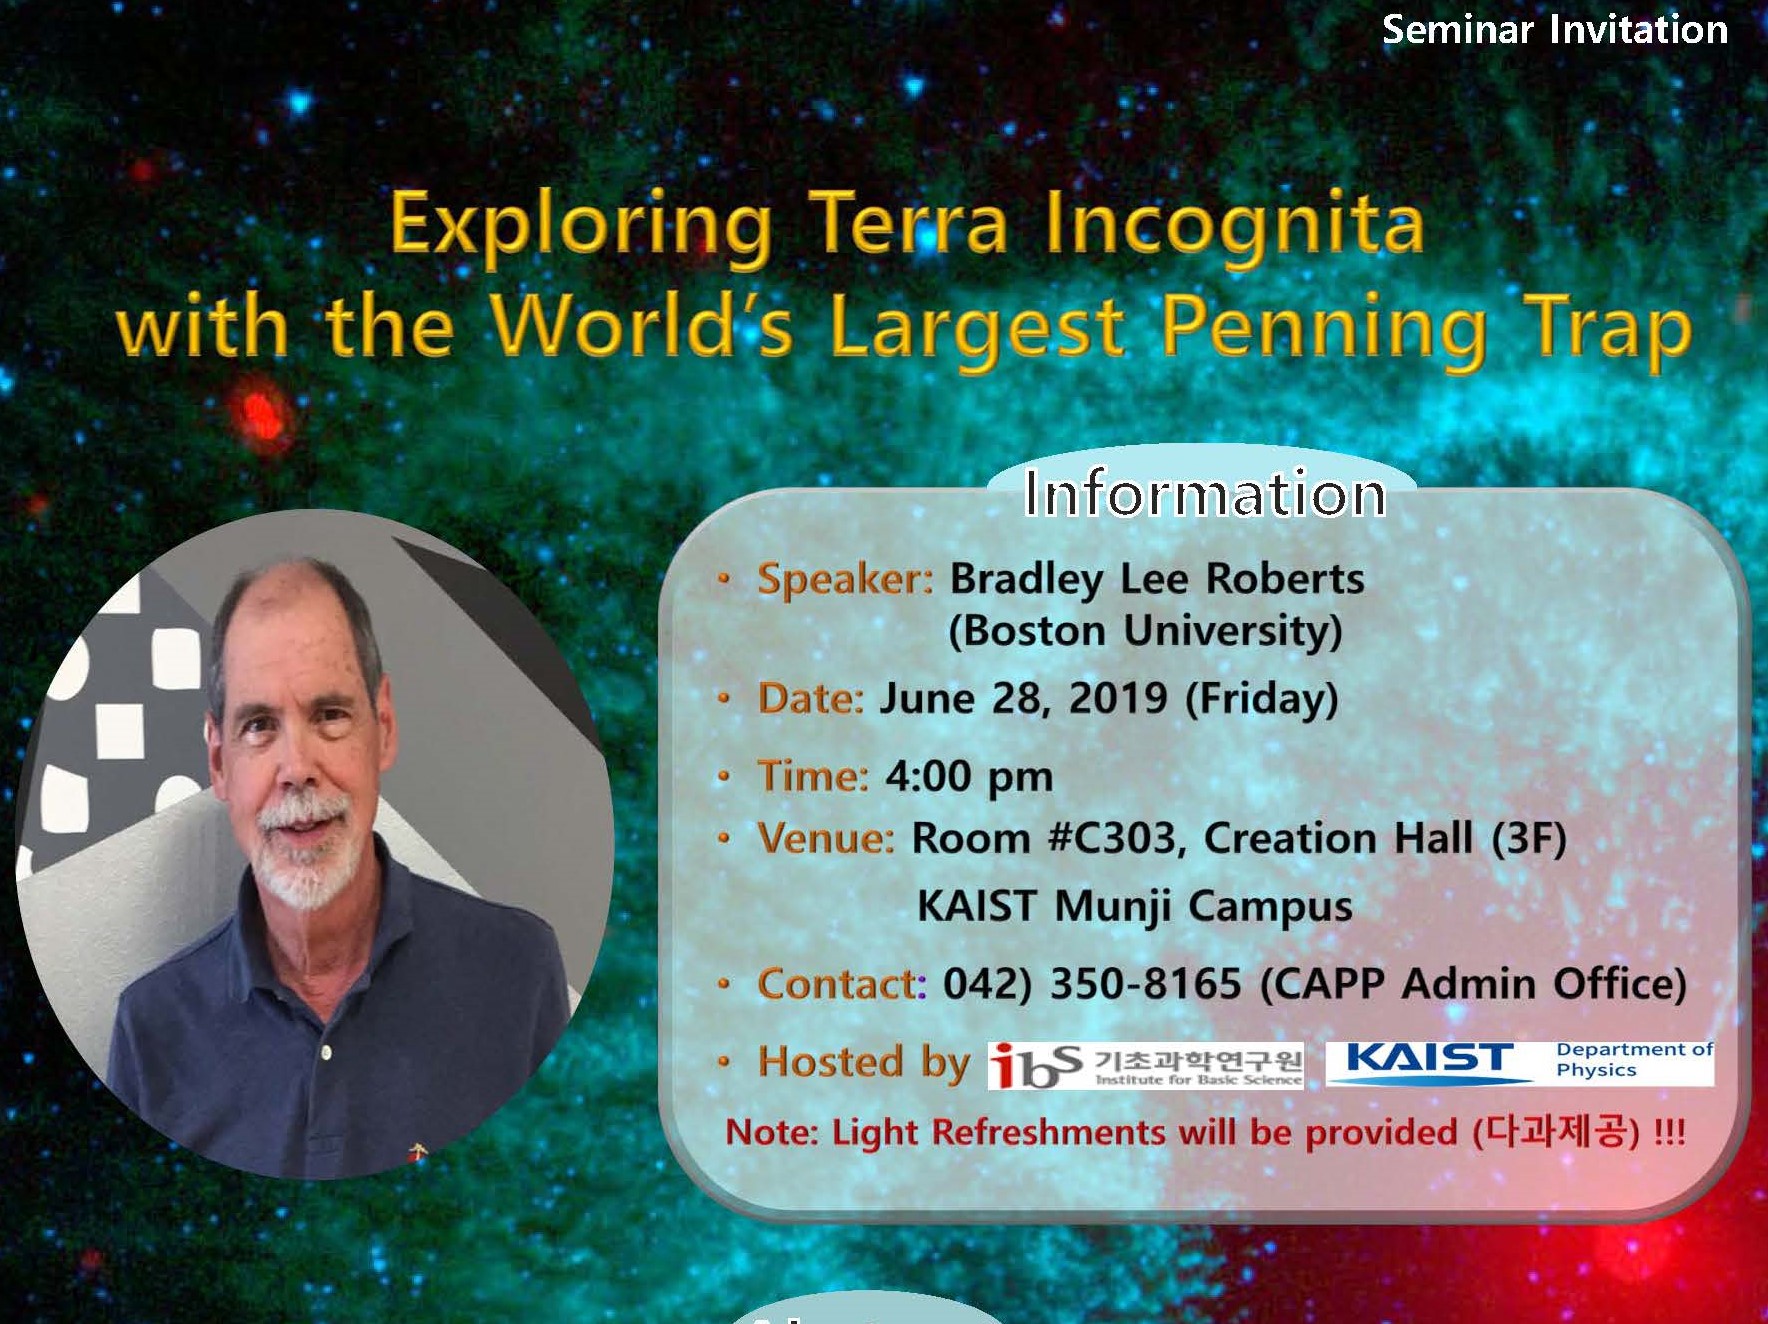 [CAPP Seminar] Exploring Terra Incognita with the World’s Largest Penning Trap